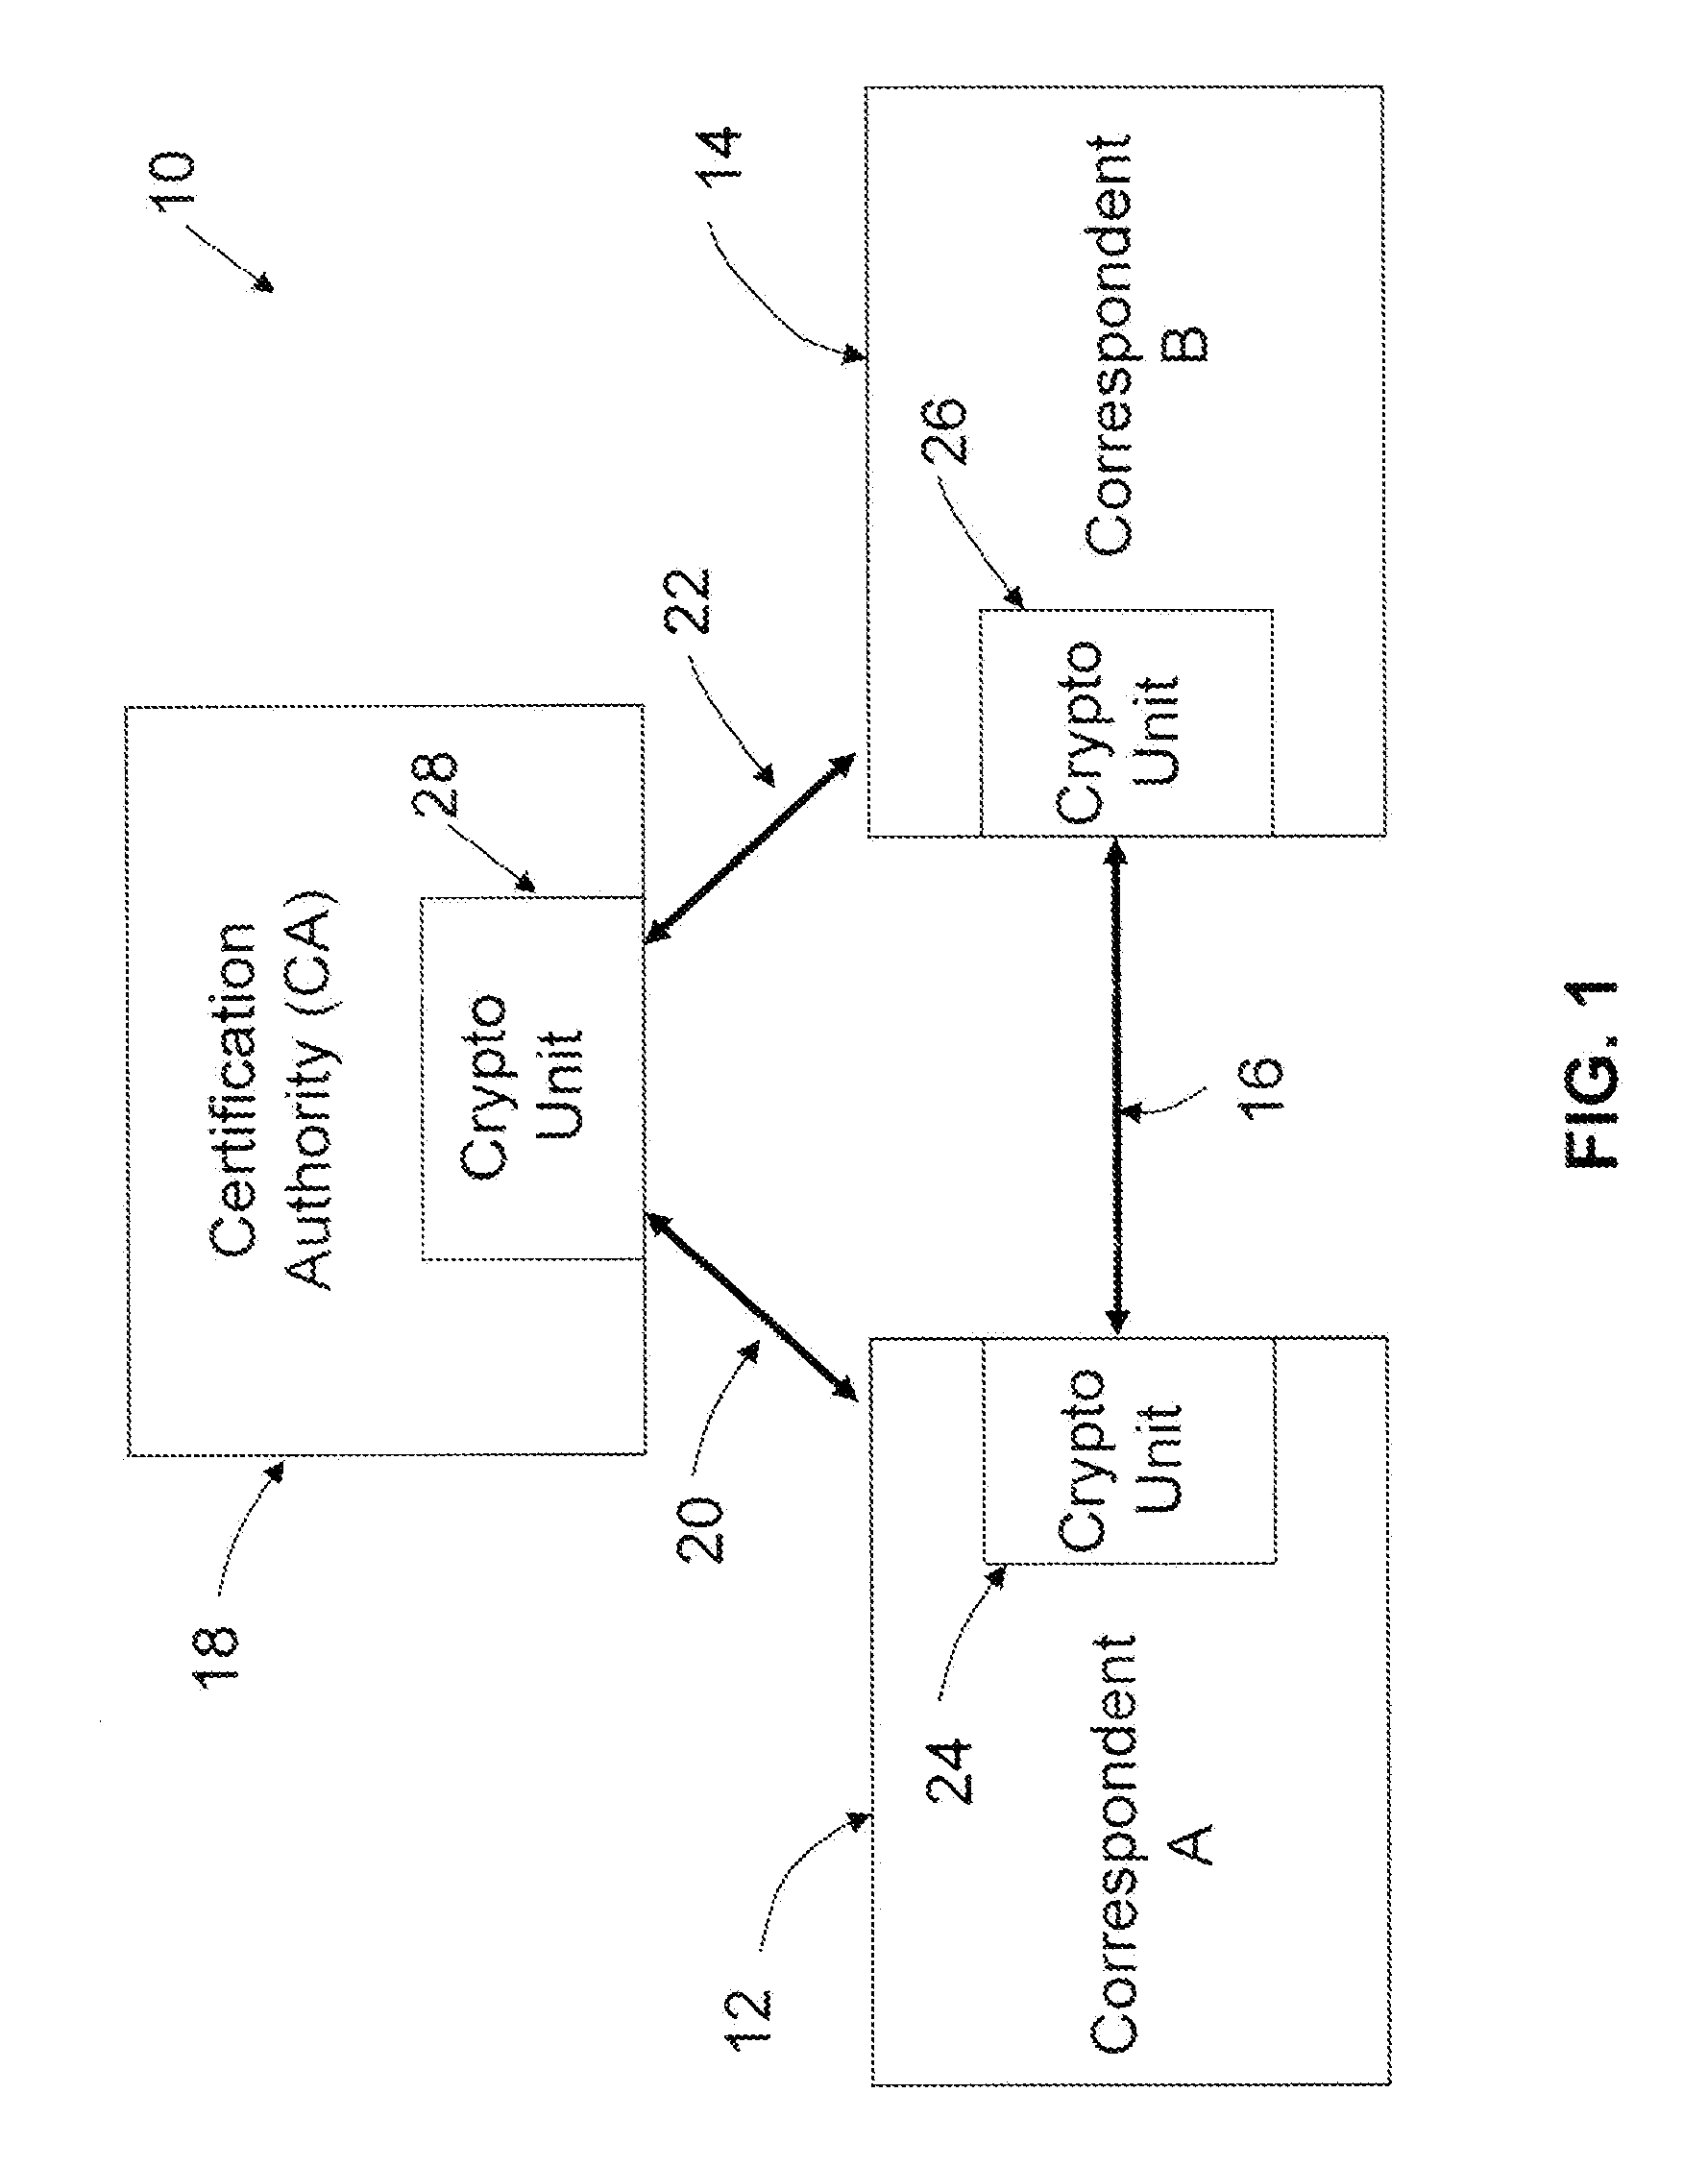 System and method for reducing computations in an implicit certificate scheme